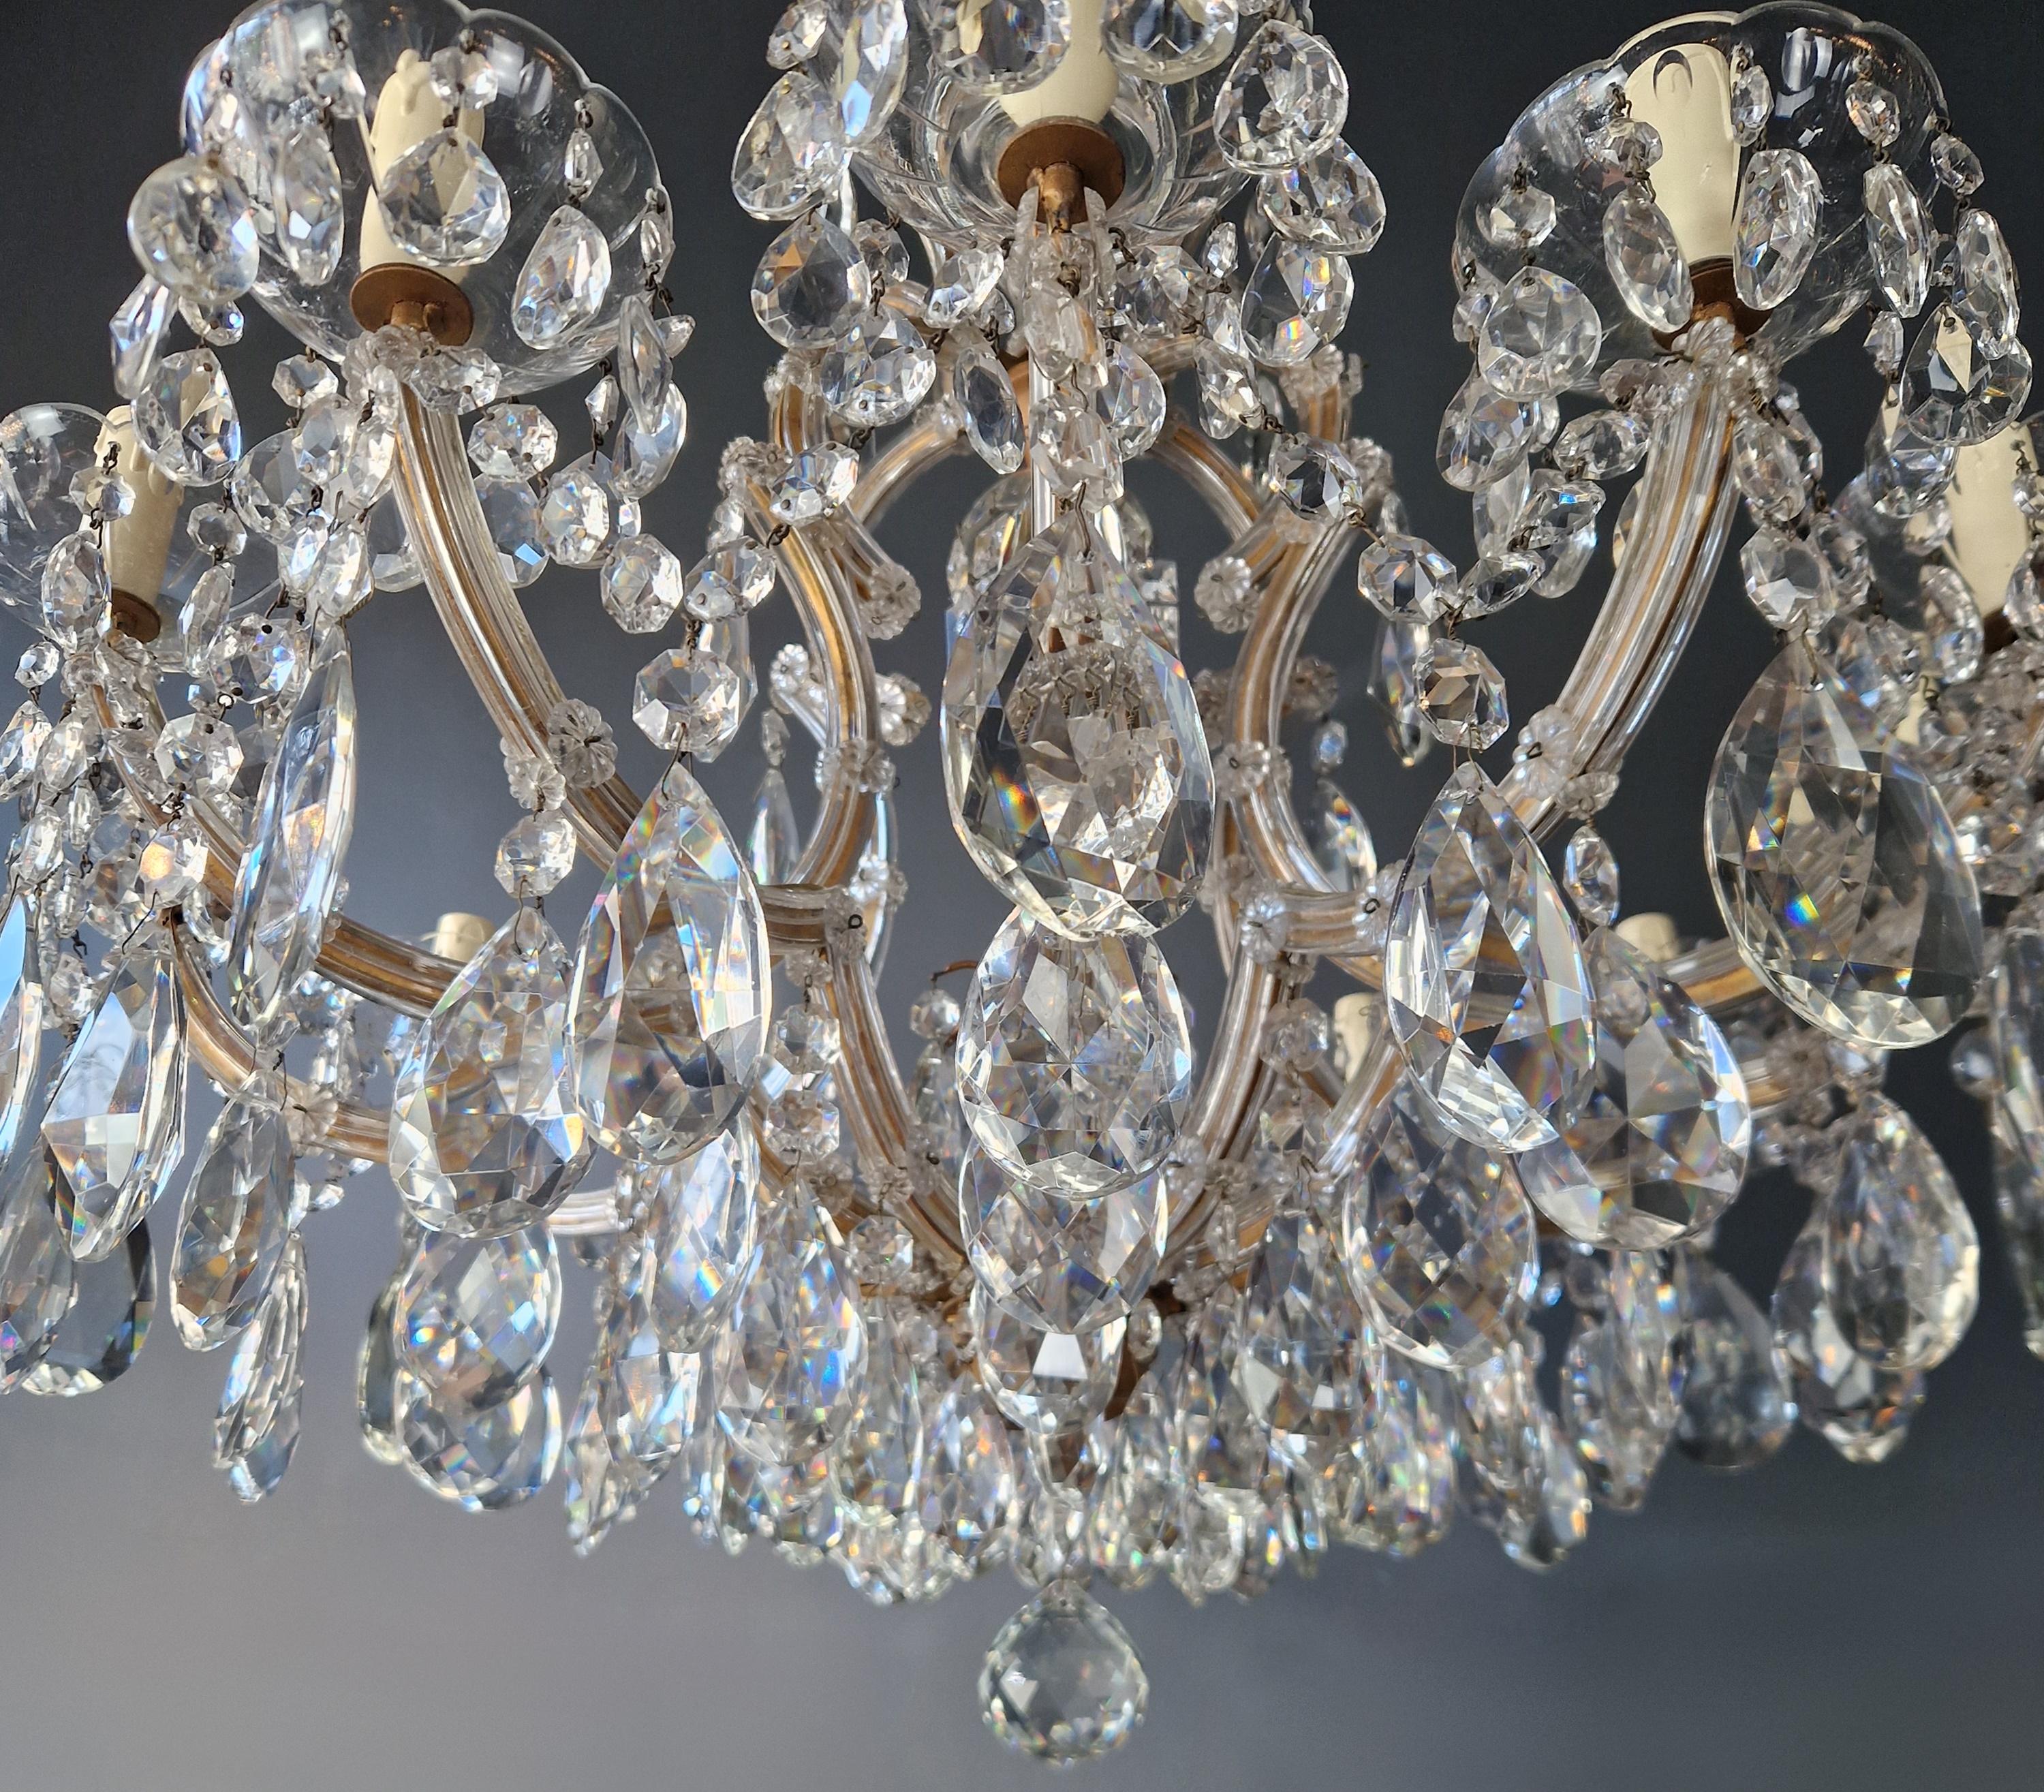 1930s Art Nouveau Maria Theresa Crystal Chandelier lustre Brass Glass  For Sale 3